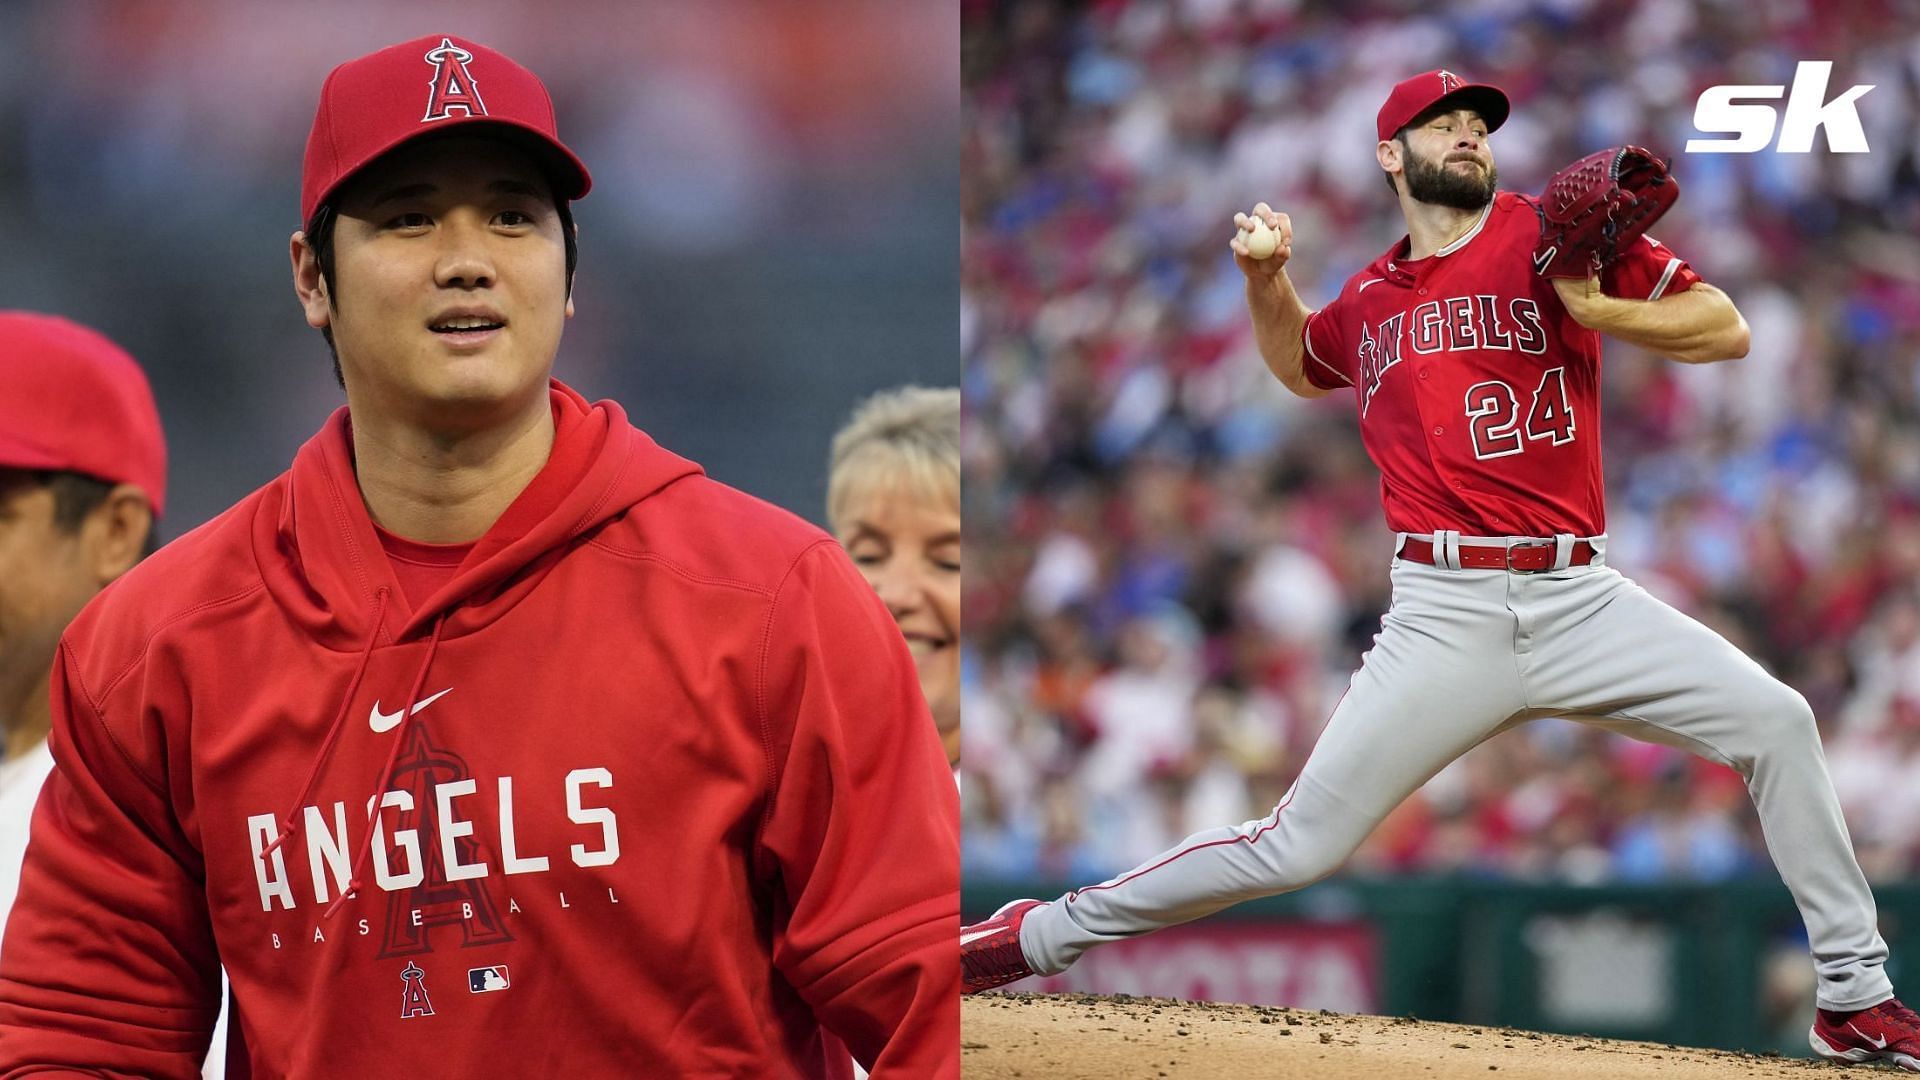 Lucas Giolito says that he would be excited to play with Shohei Ohtani again